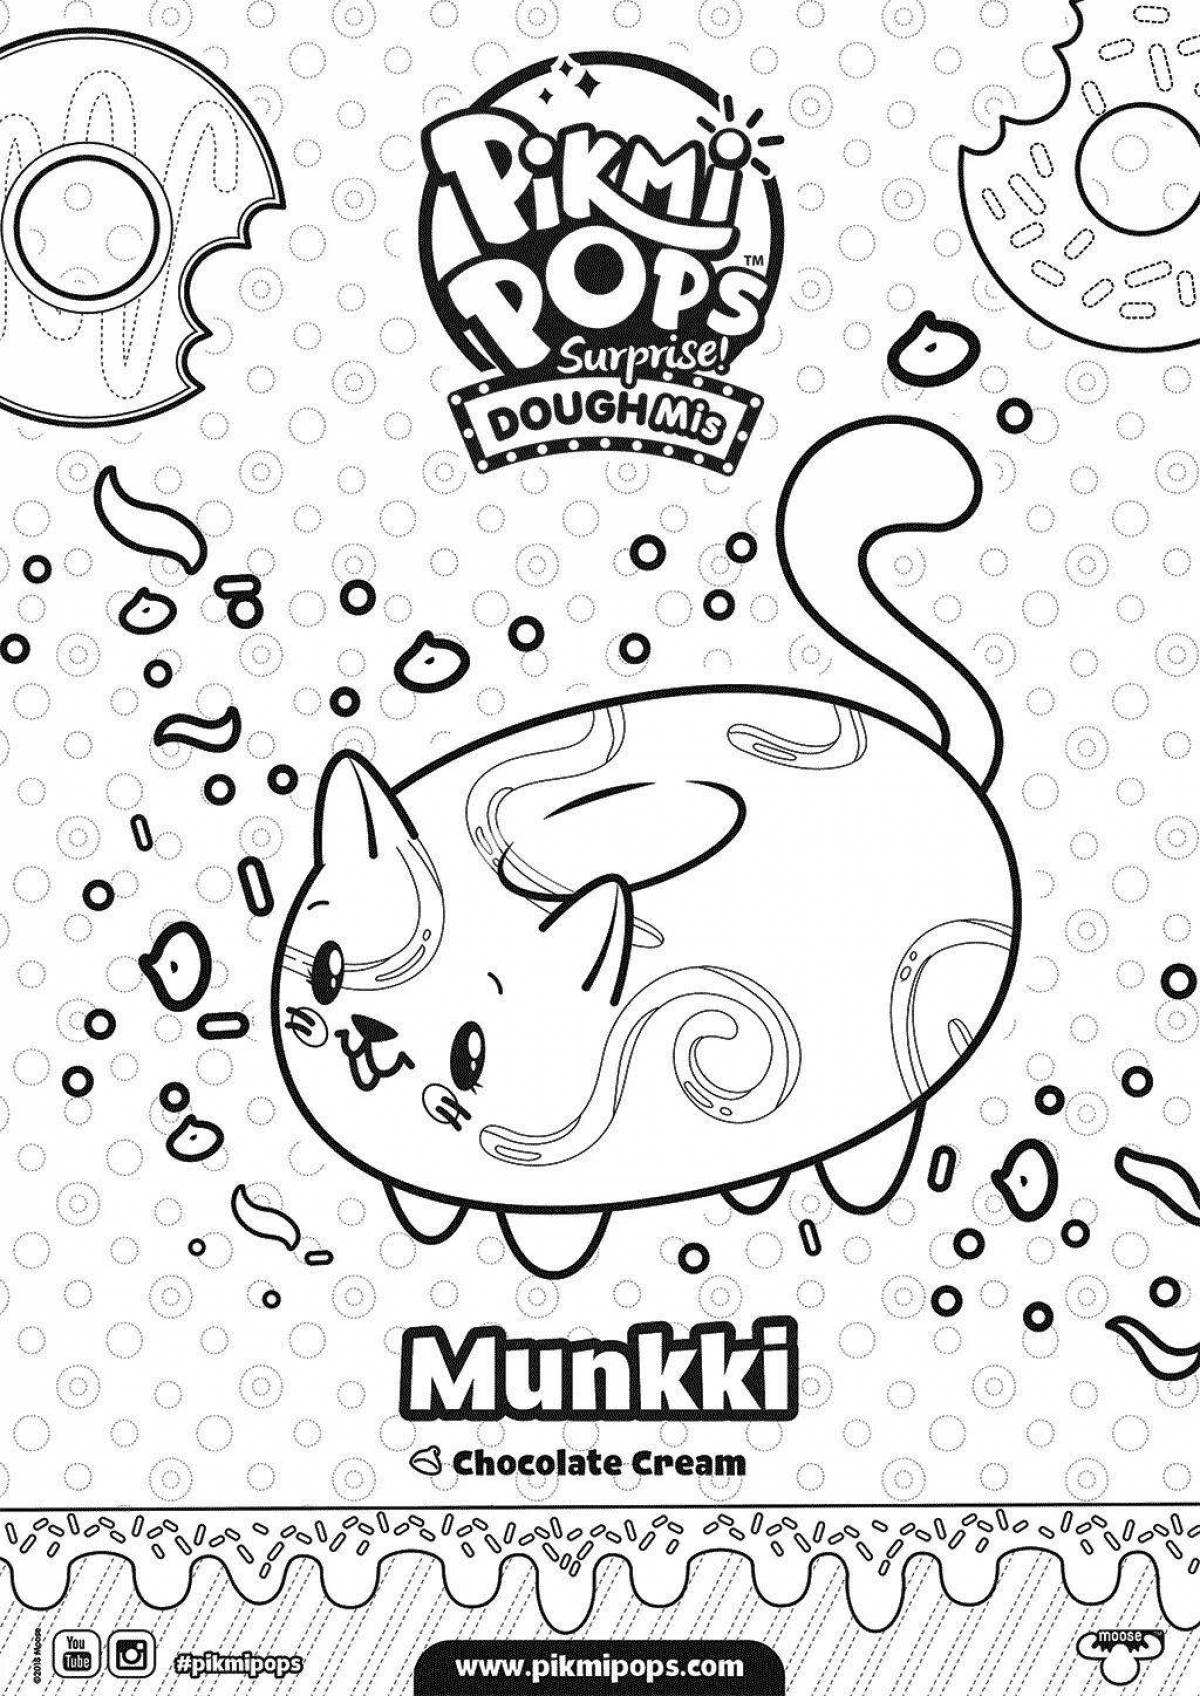 Amazing pikmy pops coloring page